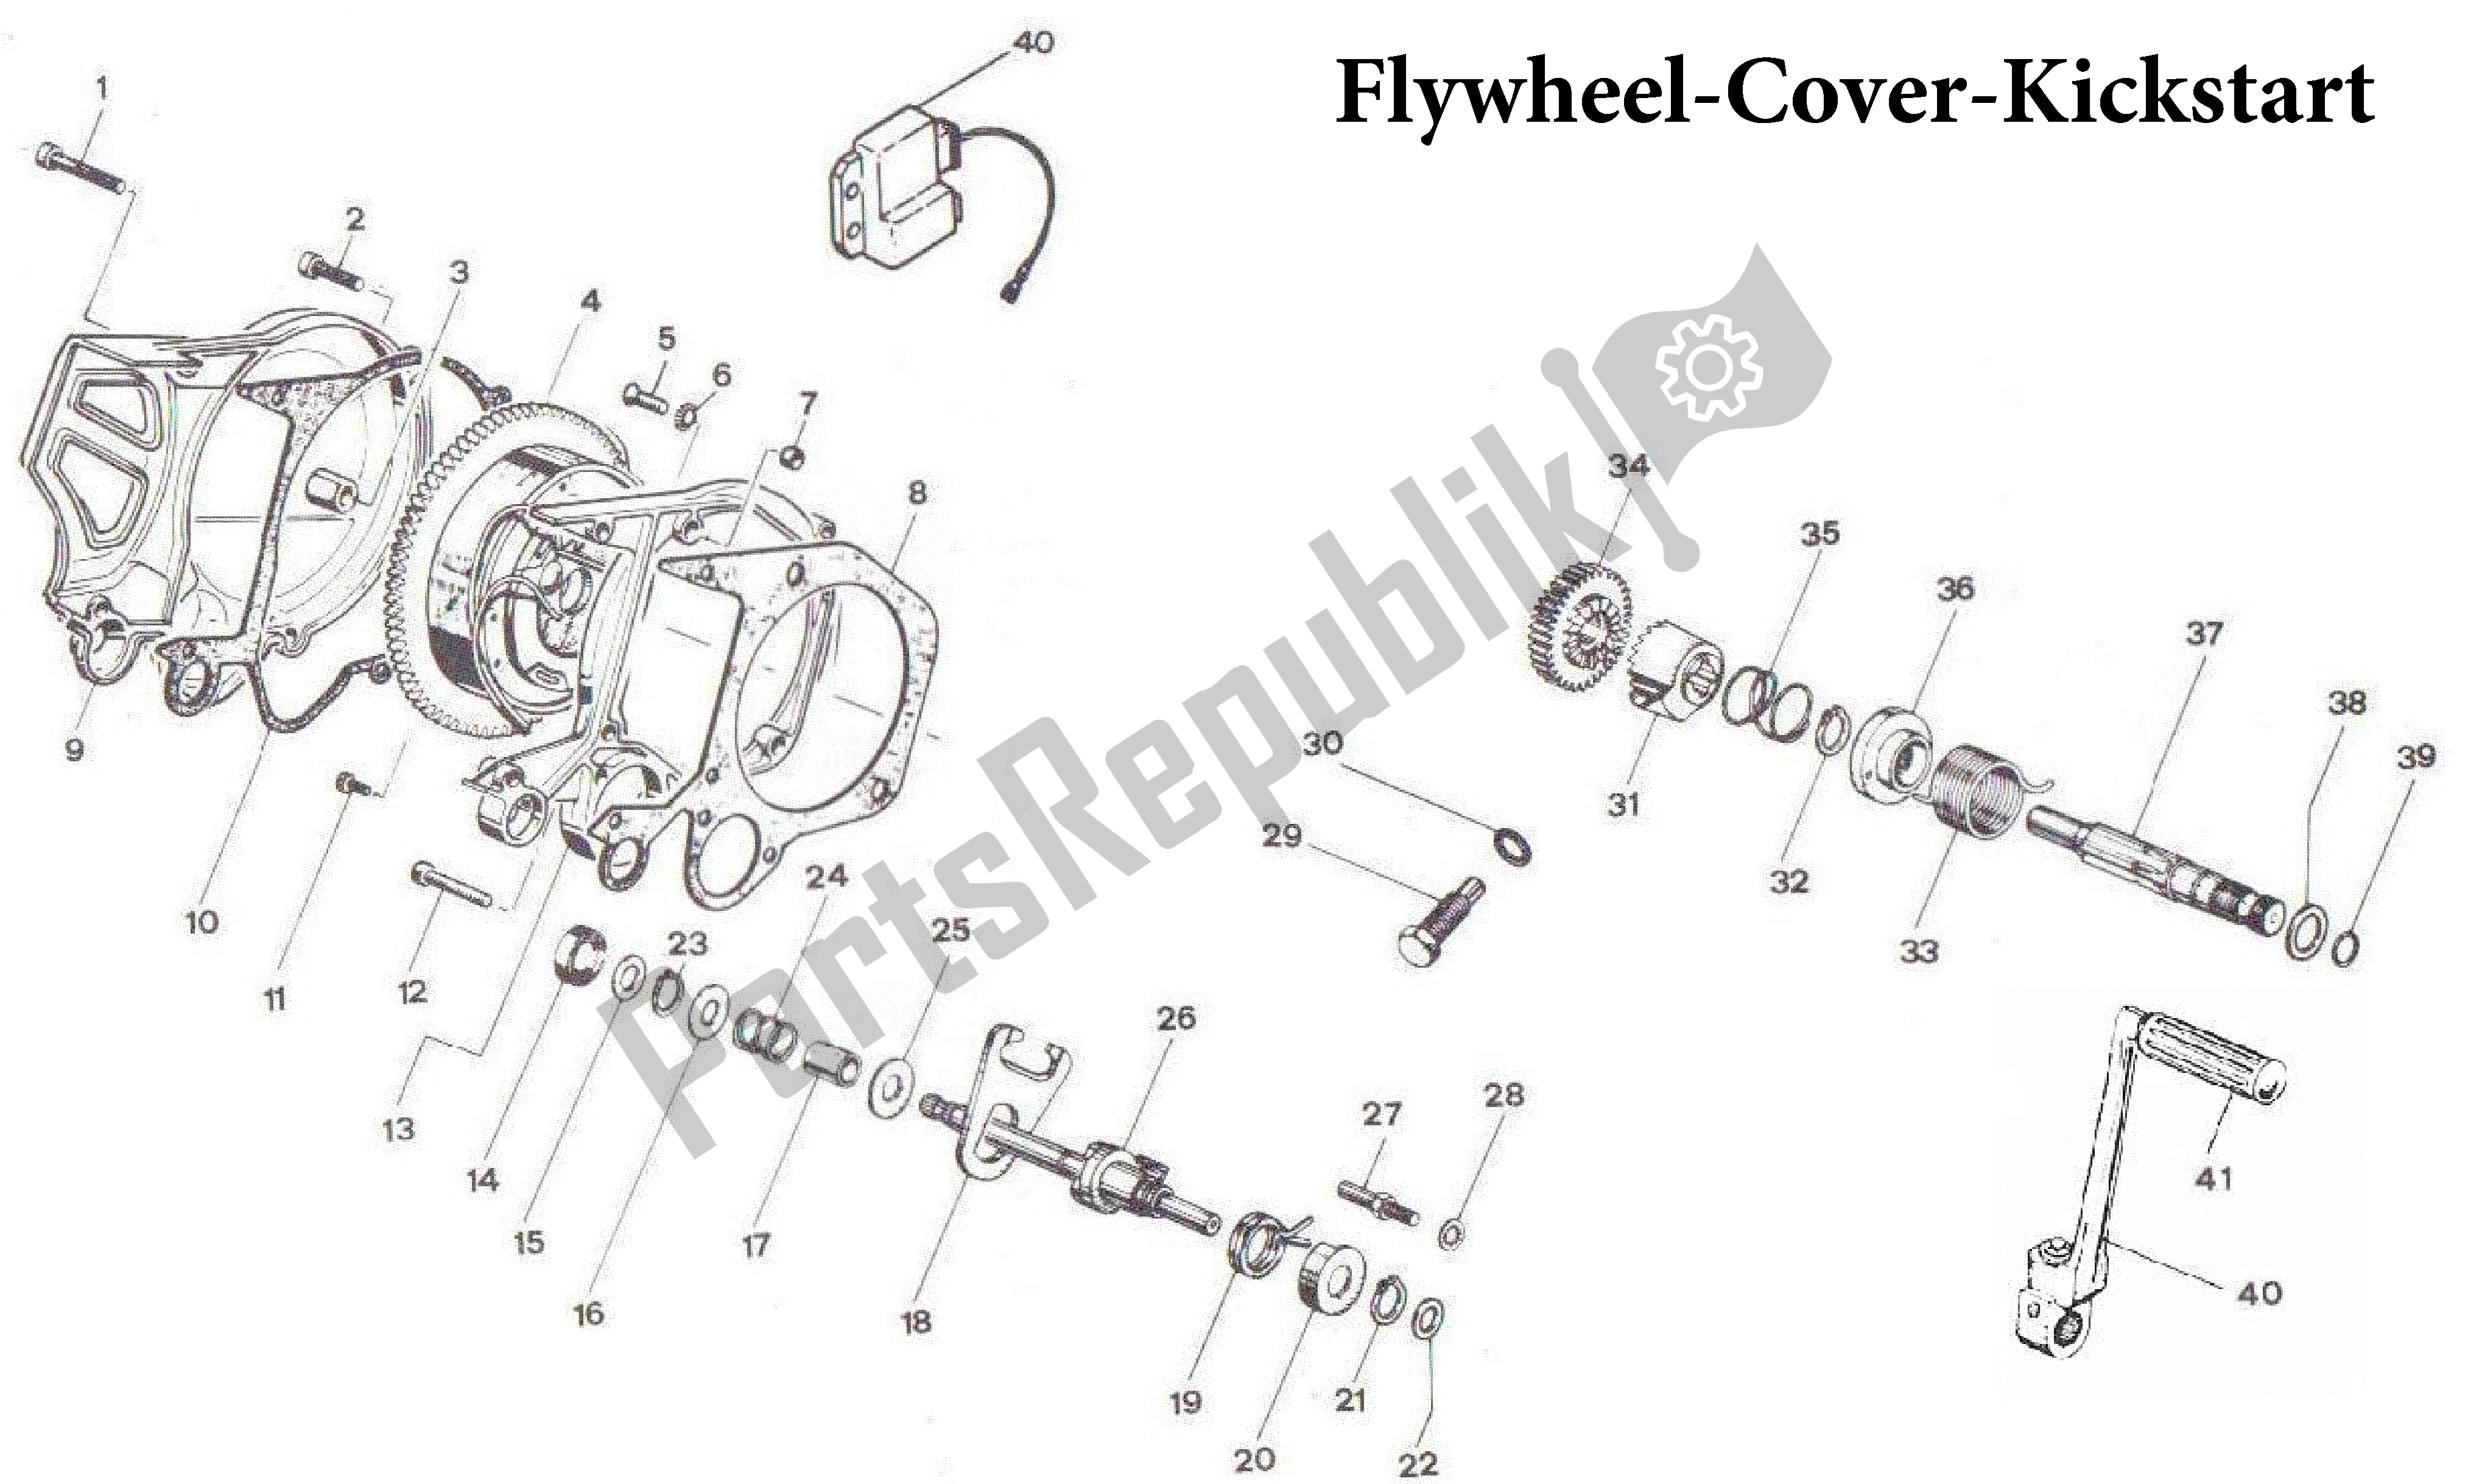 All parts for the Flywheel-cover-kickstart of the Aprilia Scarabeo 50 1998